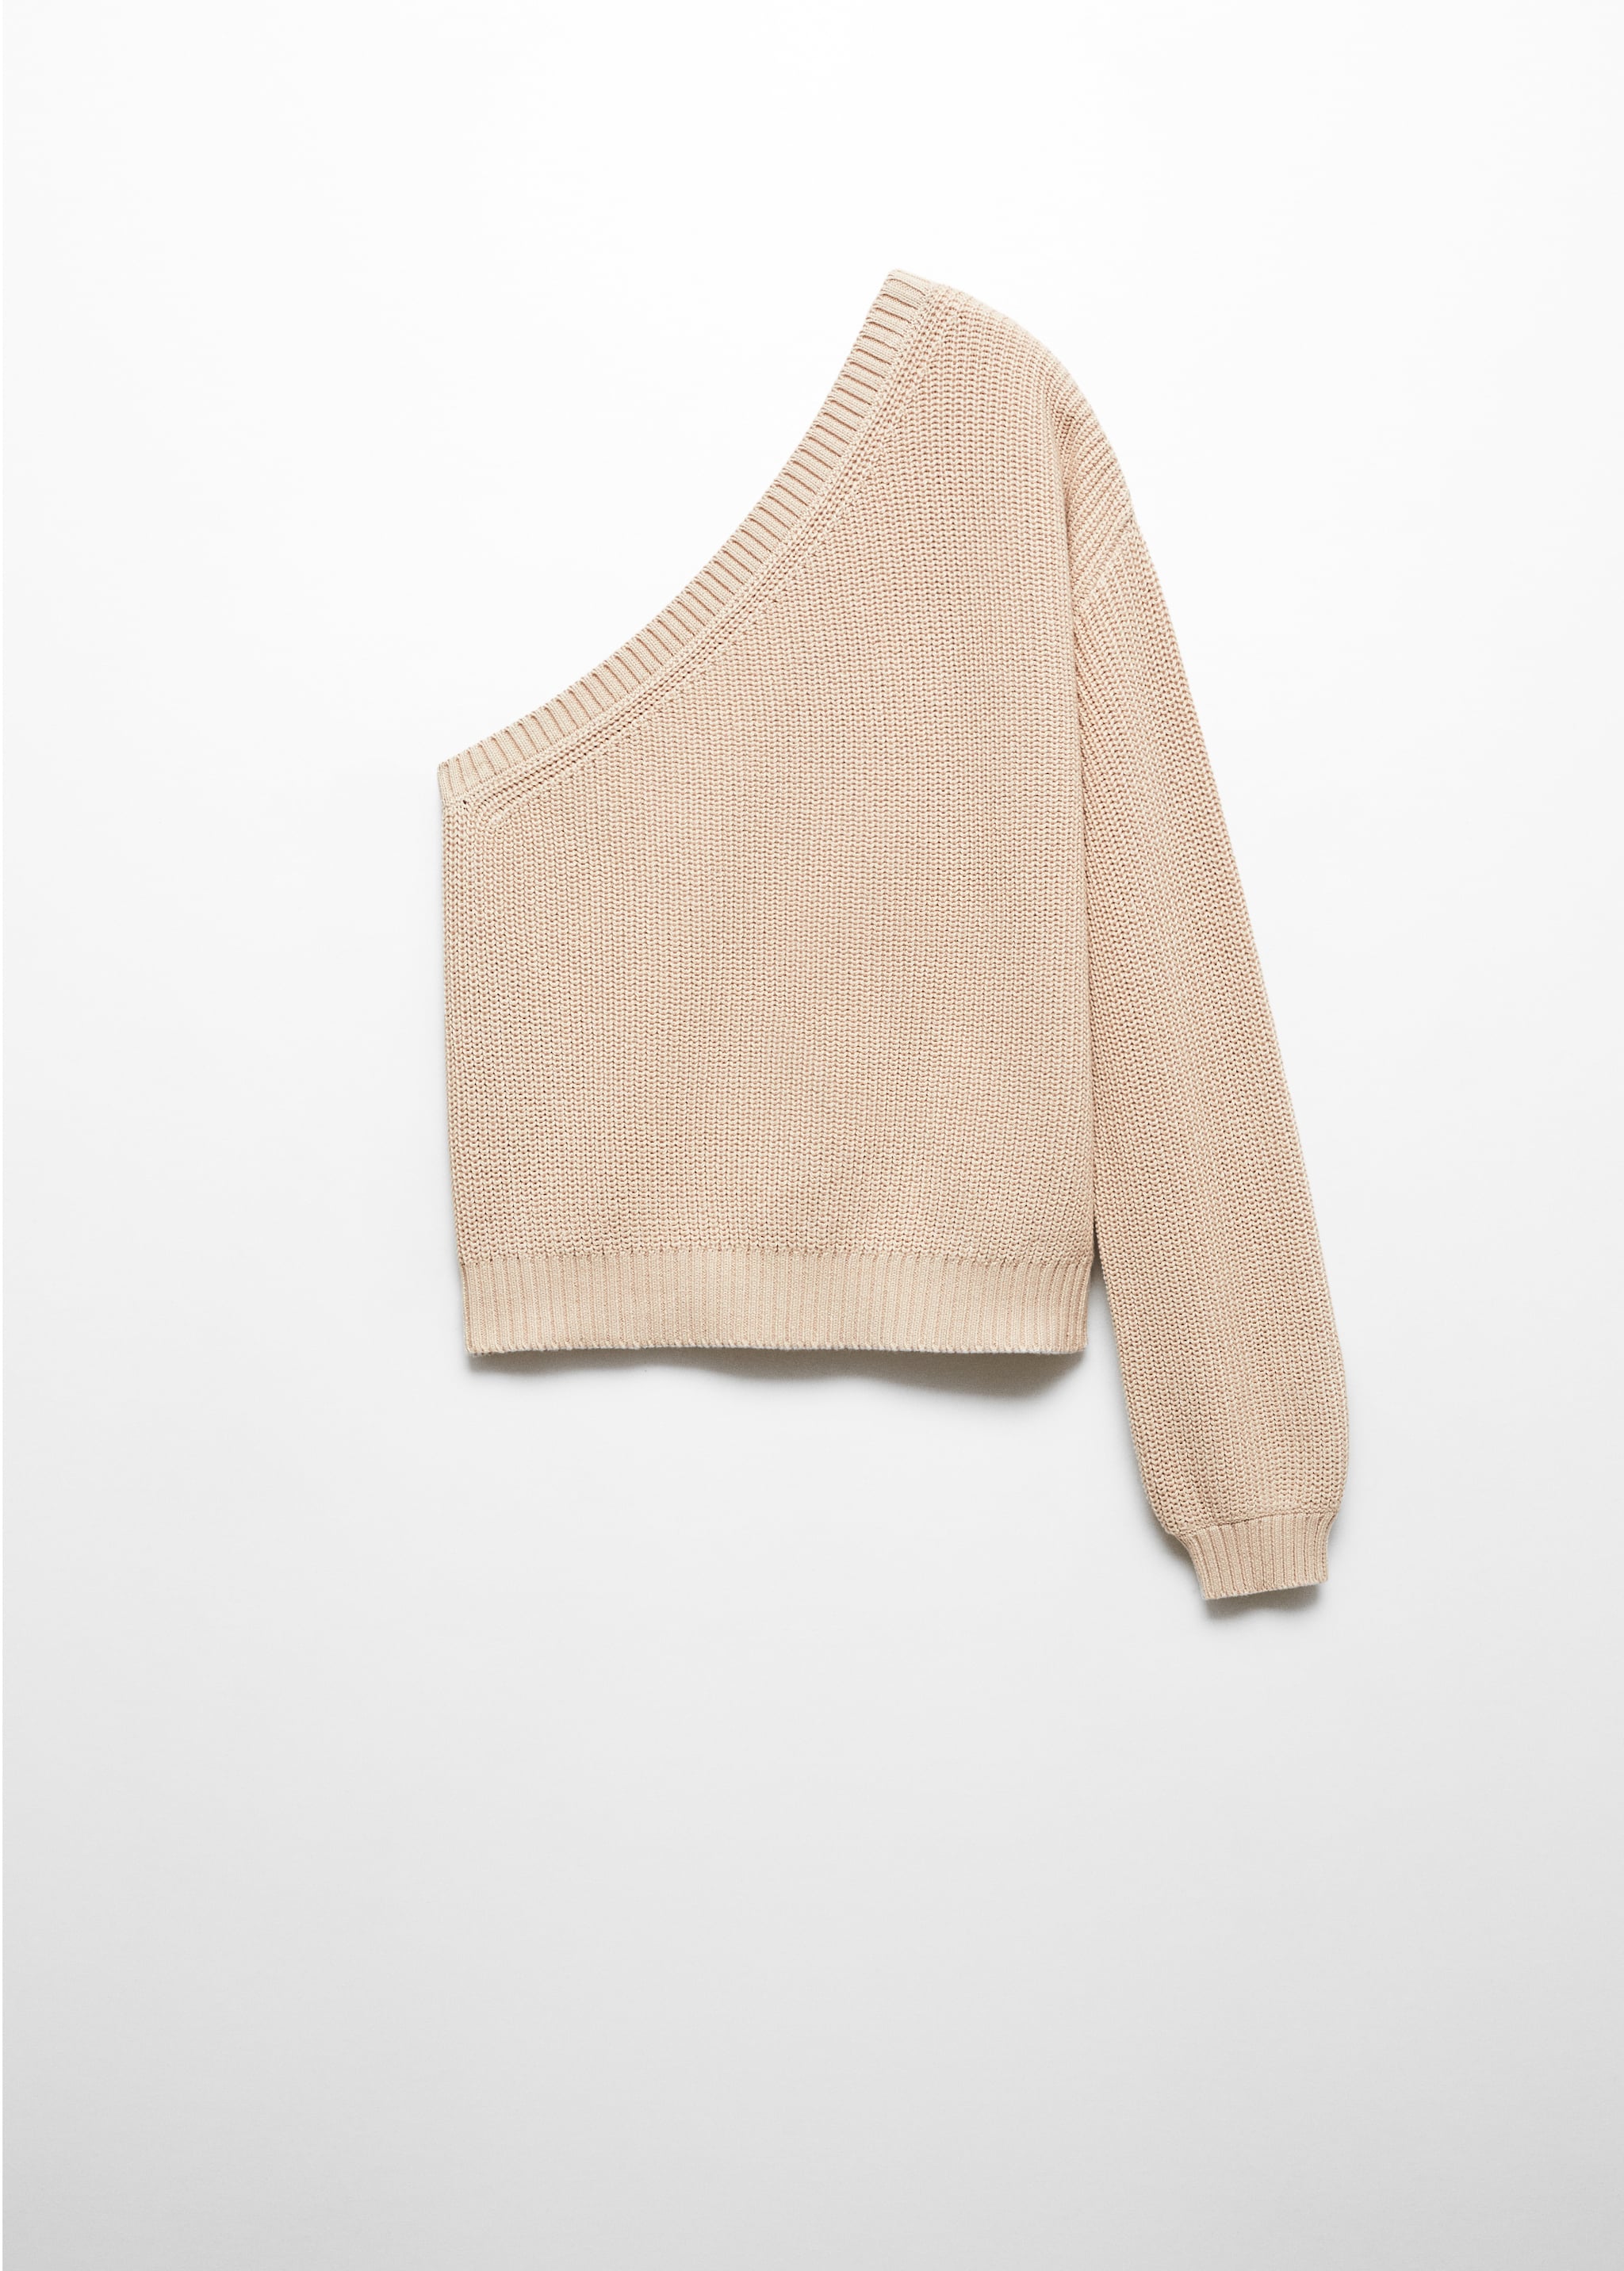 Asymmetric knit sweater - Article without model